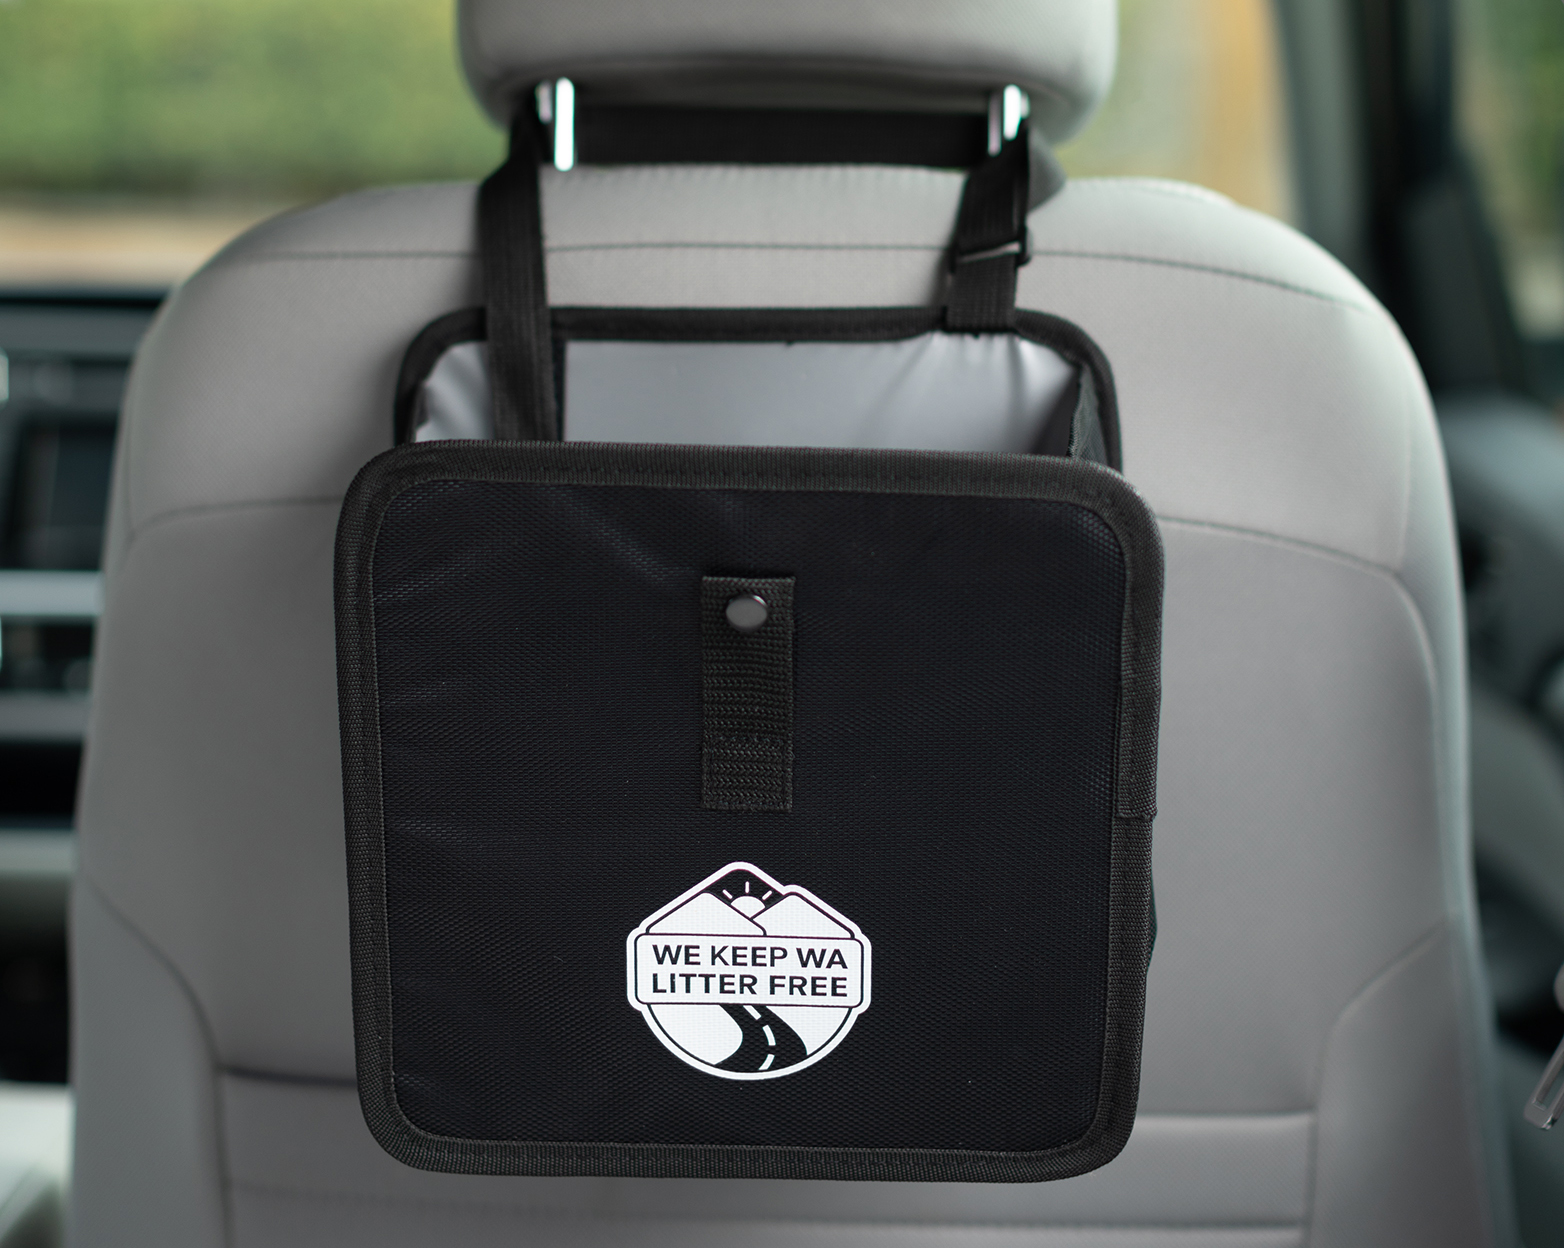 A vehicle litter bag slung around a passenger seat. Either fancy or plain, litter bags promote proper disposal of commonly littered items.